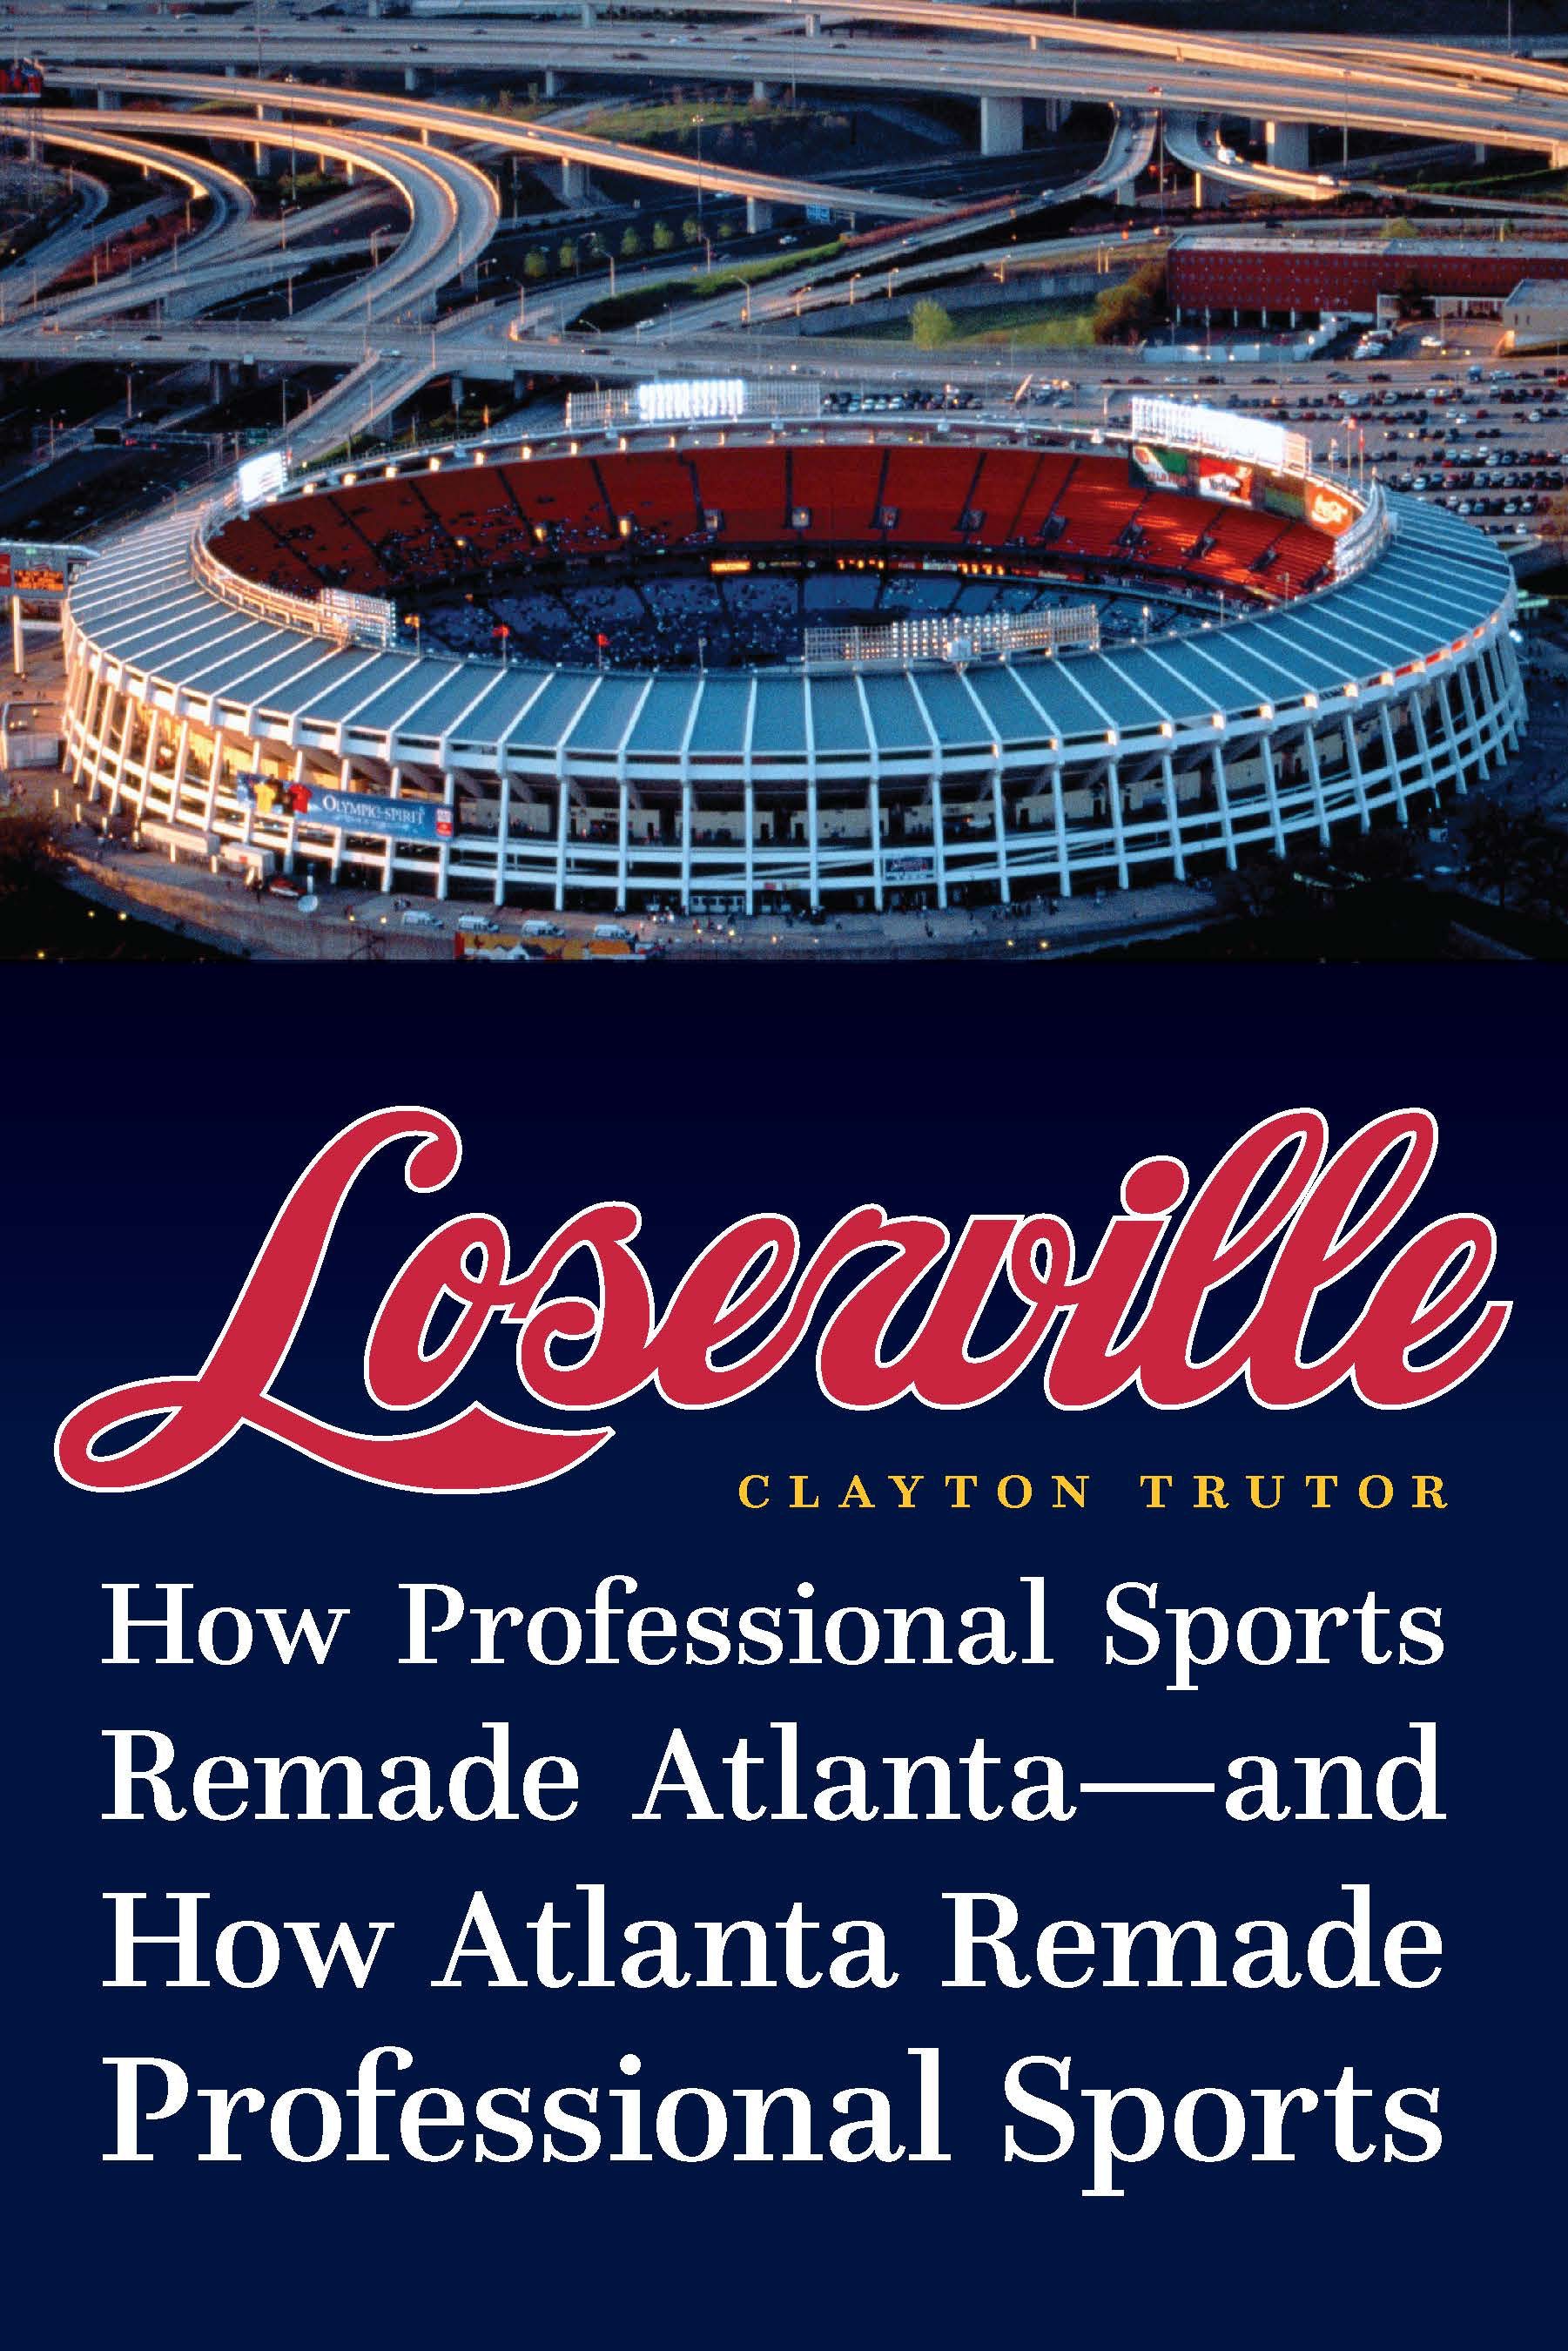 Loserville: How Professional Sports Remade Atlanta—and How Atlanta Remade Professional Sports